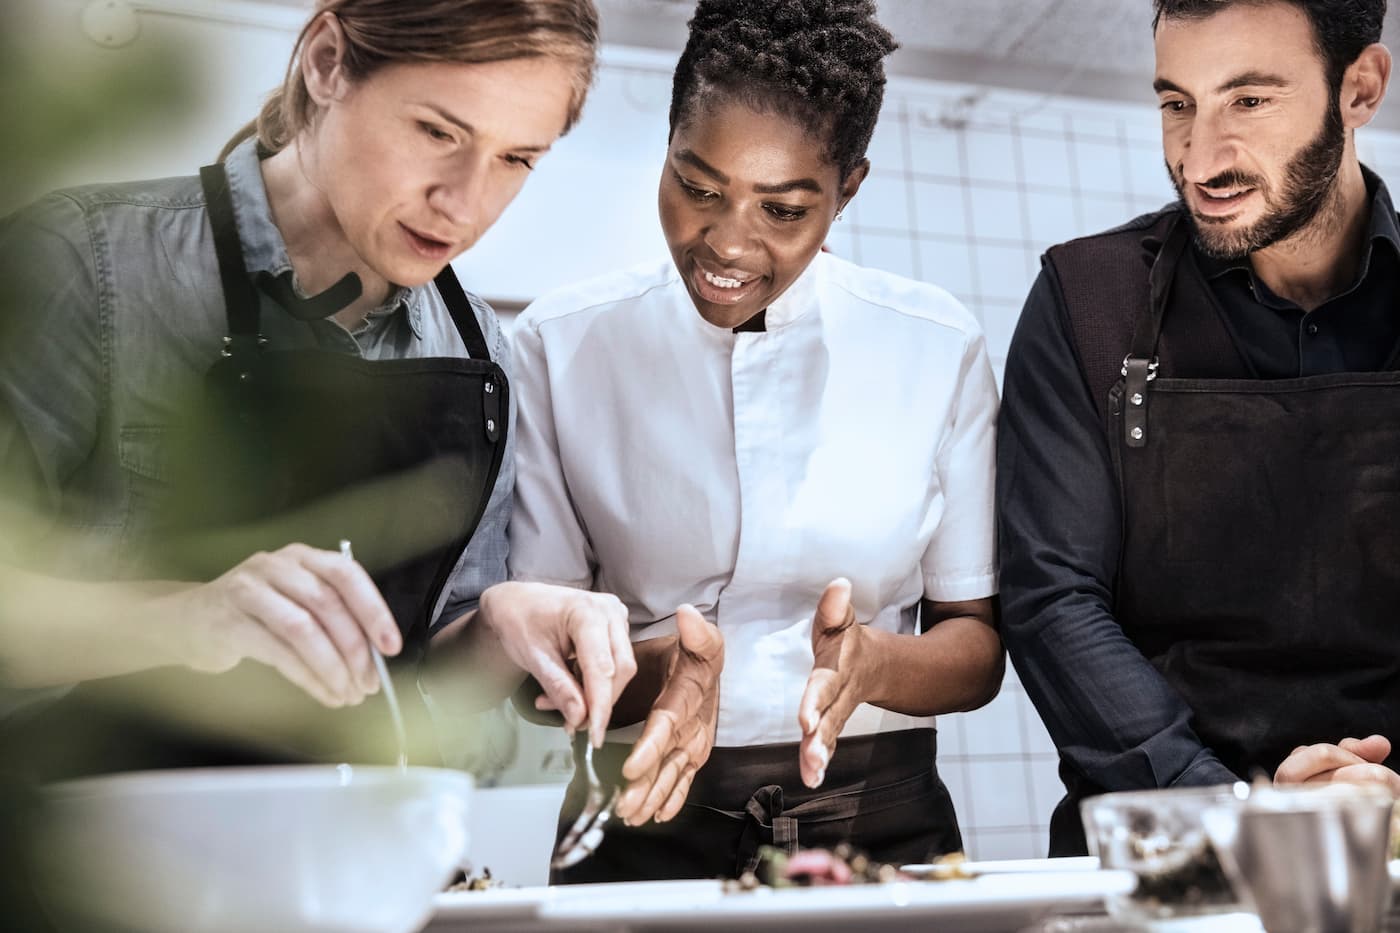 Female chef teaching a cooking class